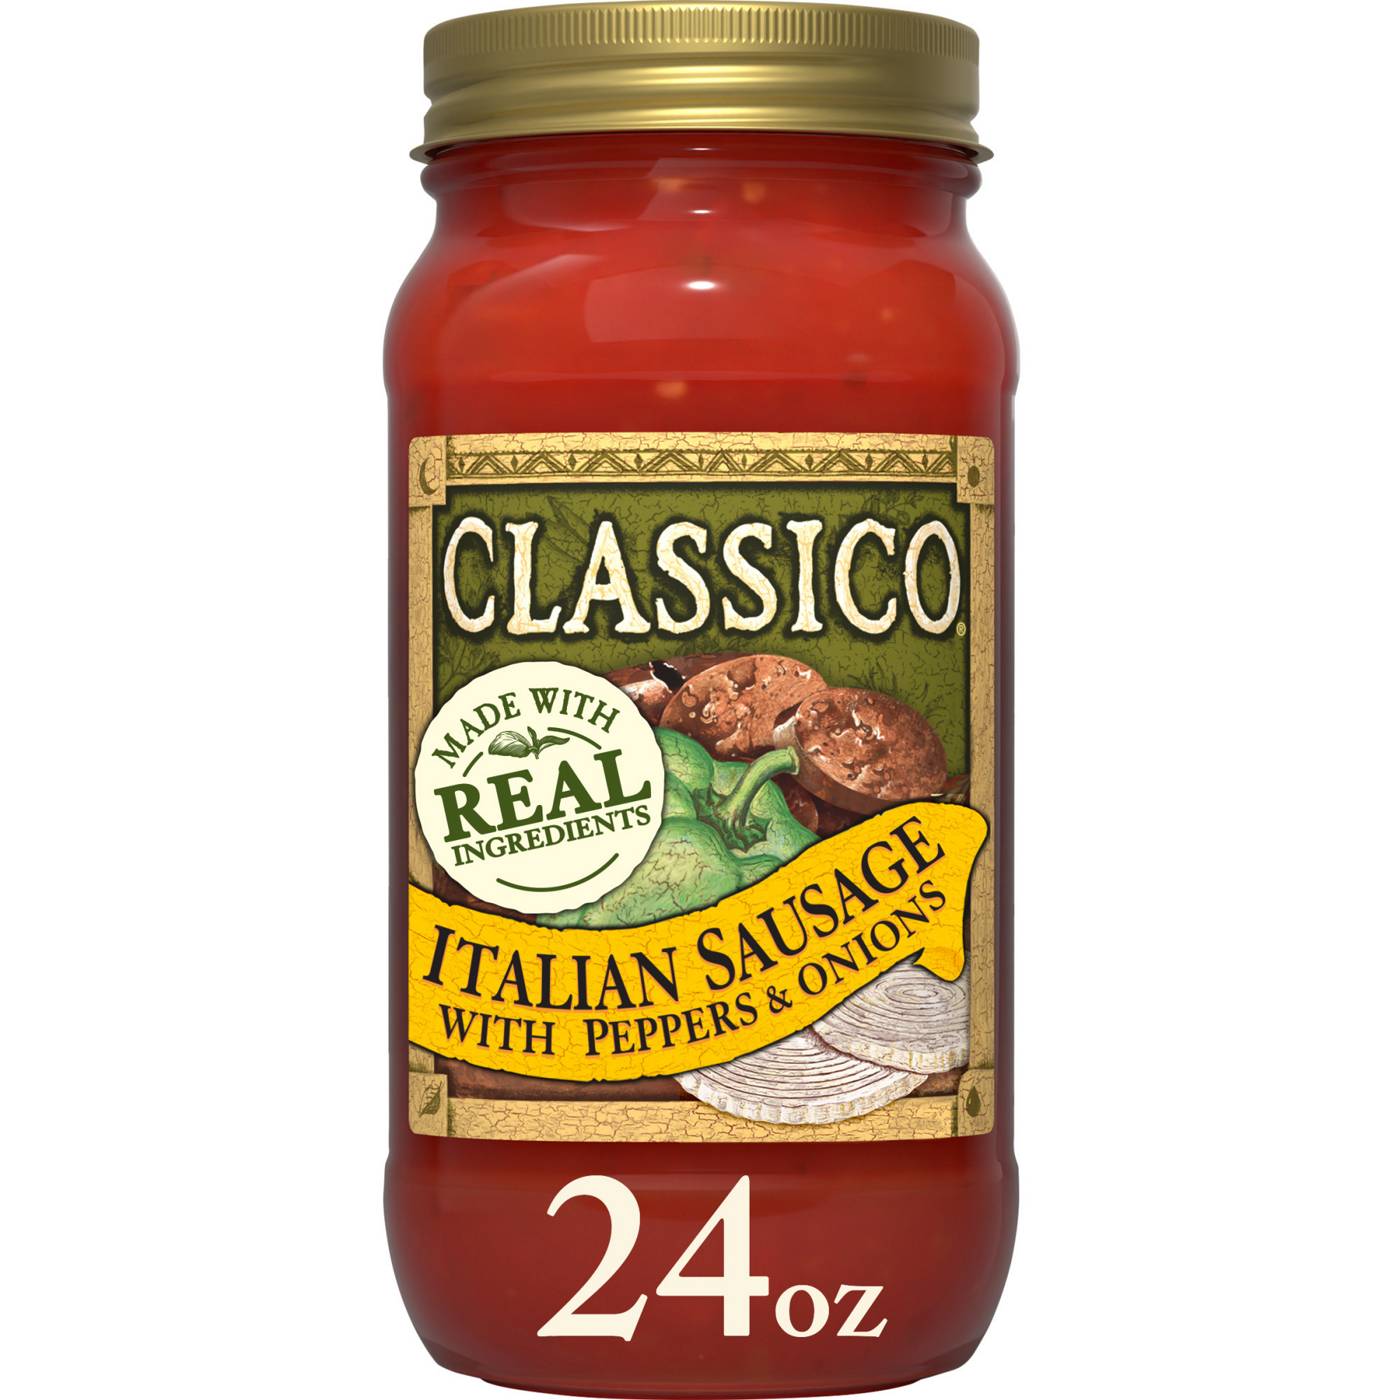 Classico Italian Sausage with Peppers & Onions Pasta Sauce; image 1 of 5